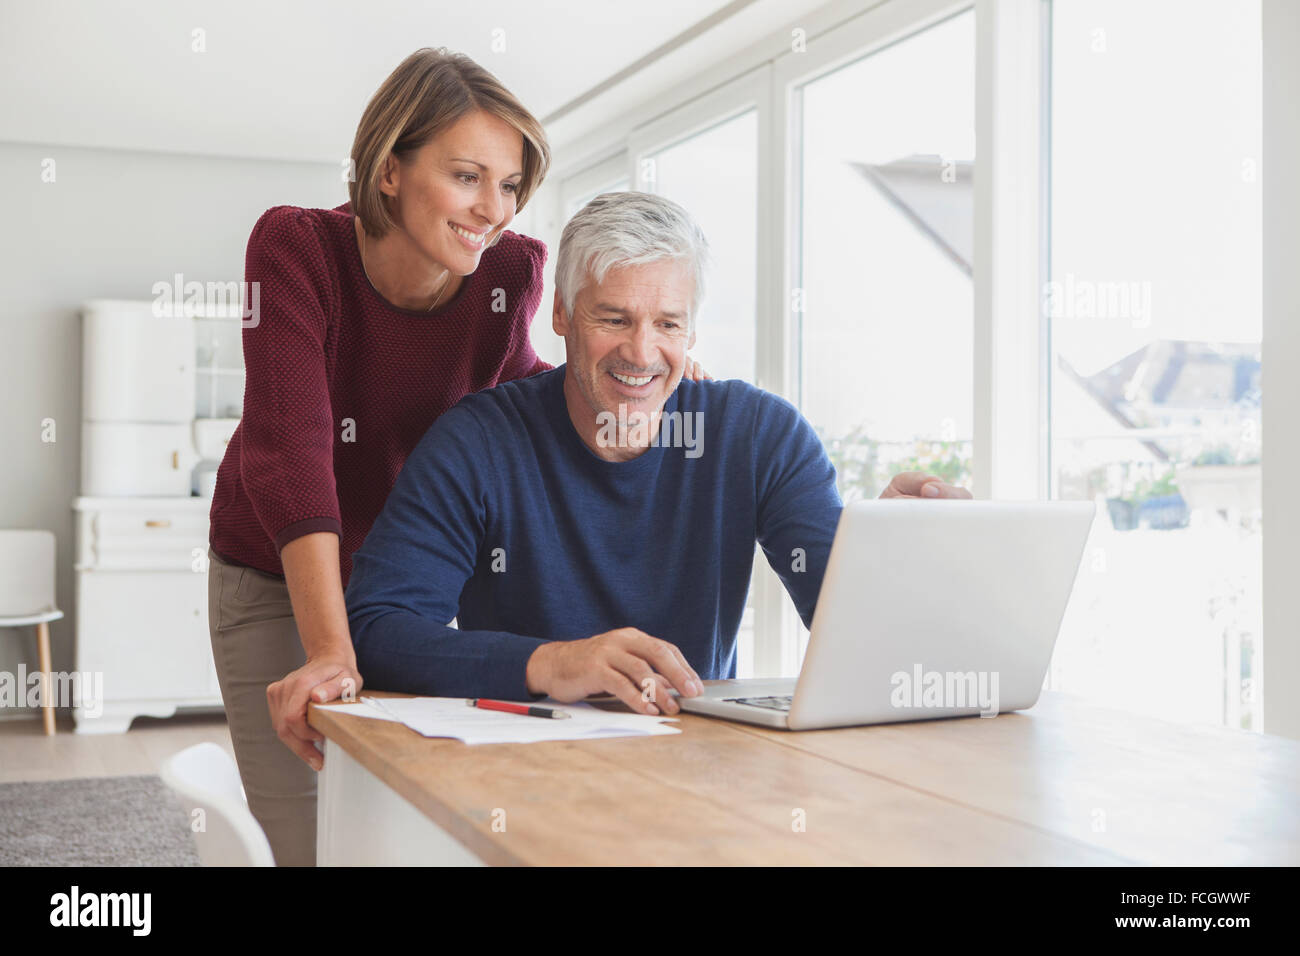 Smiling couple using laptop at home Stock Photo